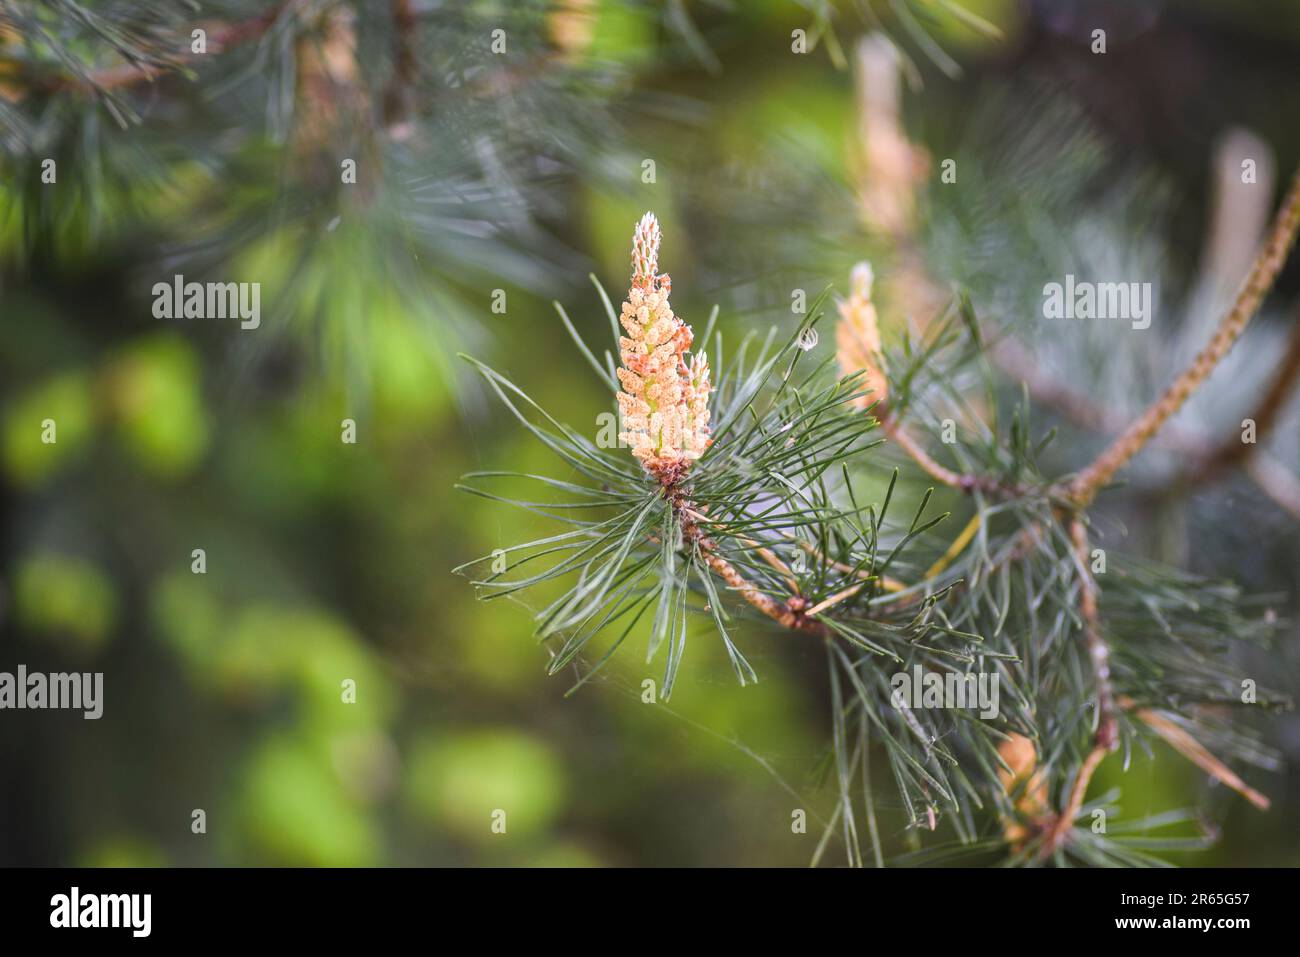 Pine flowers growing in the garden in spring. Stock Photo